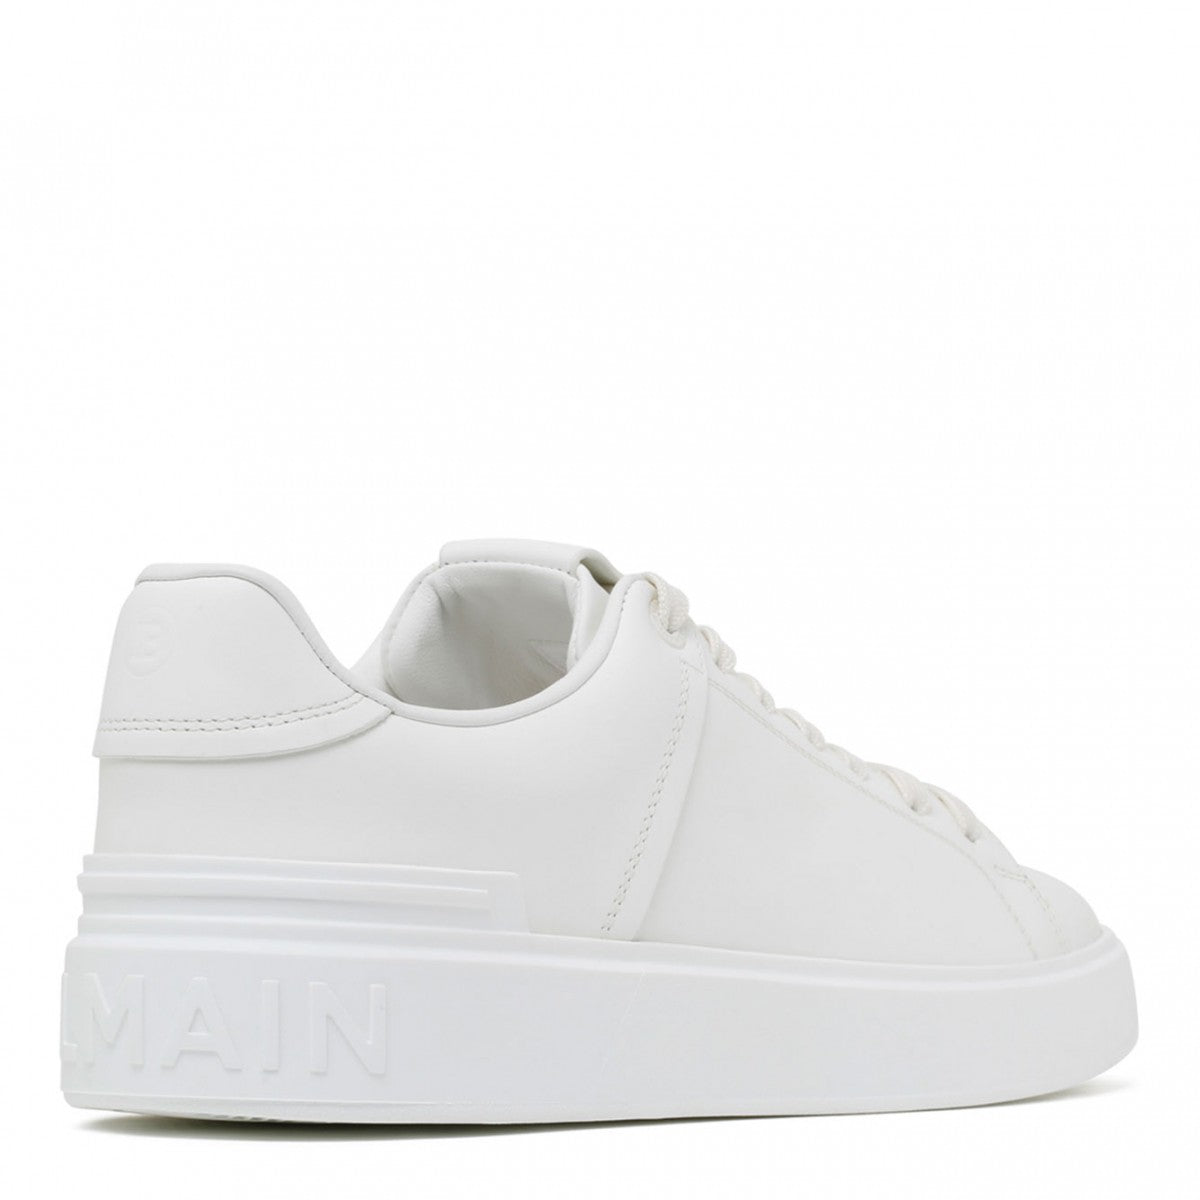 LAB BAL Full White Colour Mens Sports Sneakers Shoes Premium Quality With Box 19951591